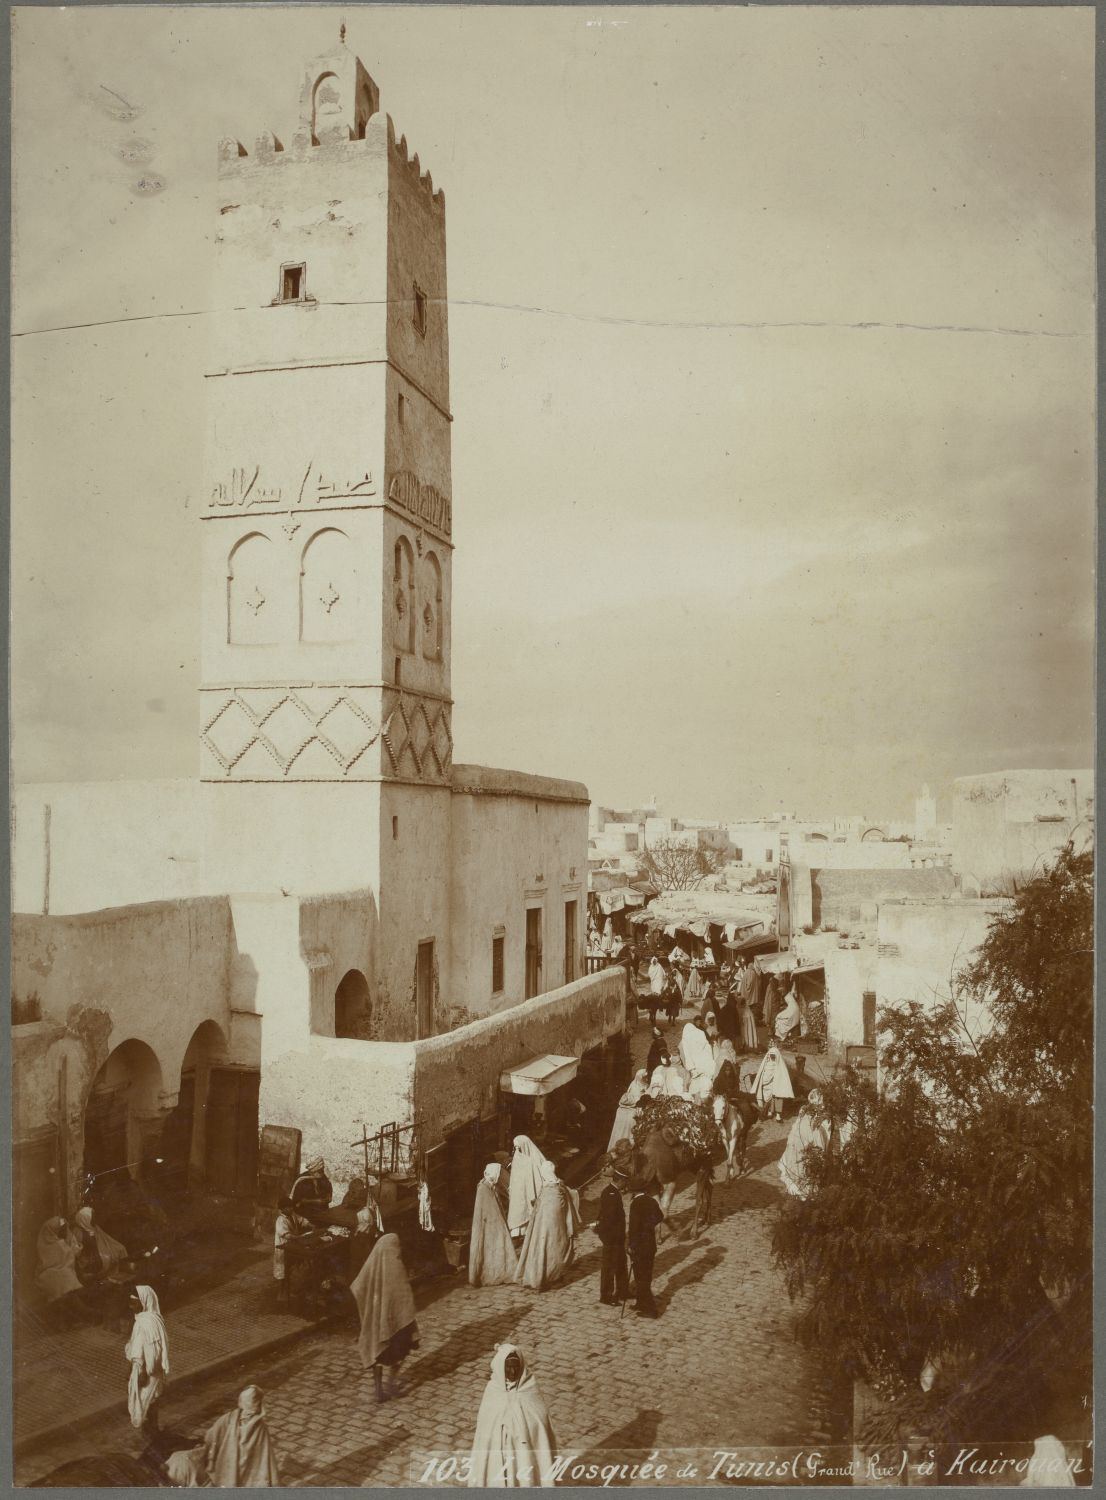 Exterior view from across a crowded street toward the minaret.